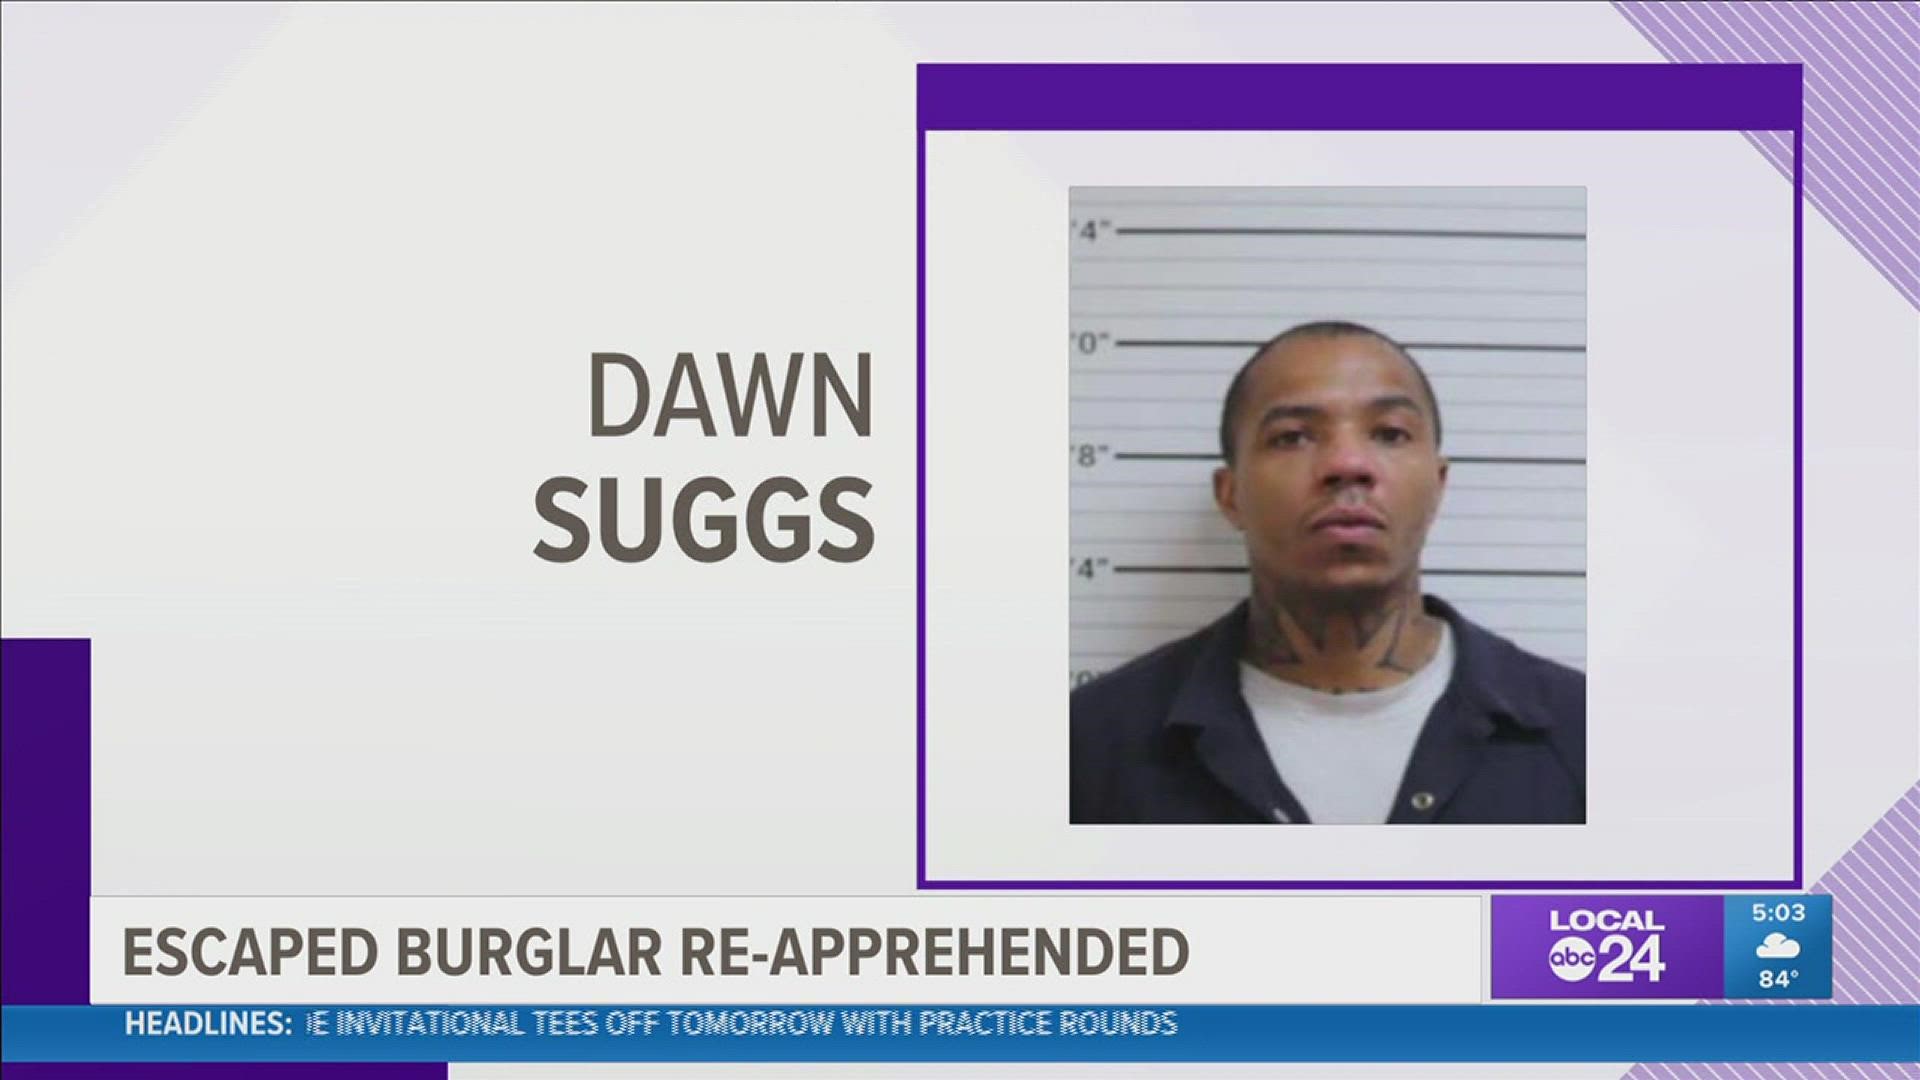 39-year-old Dawn Suggs, who had been in jail for burglary, is caught again.